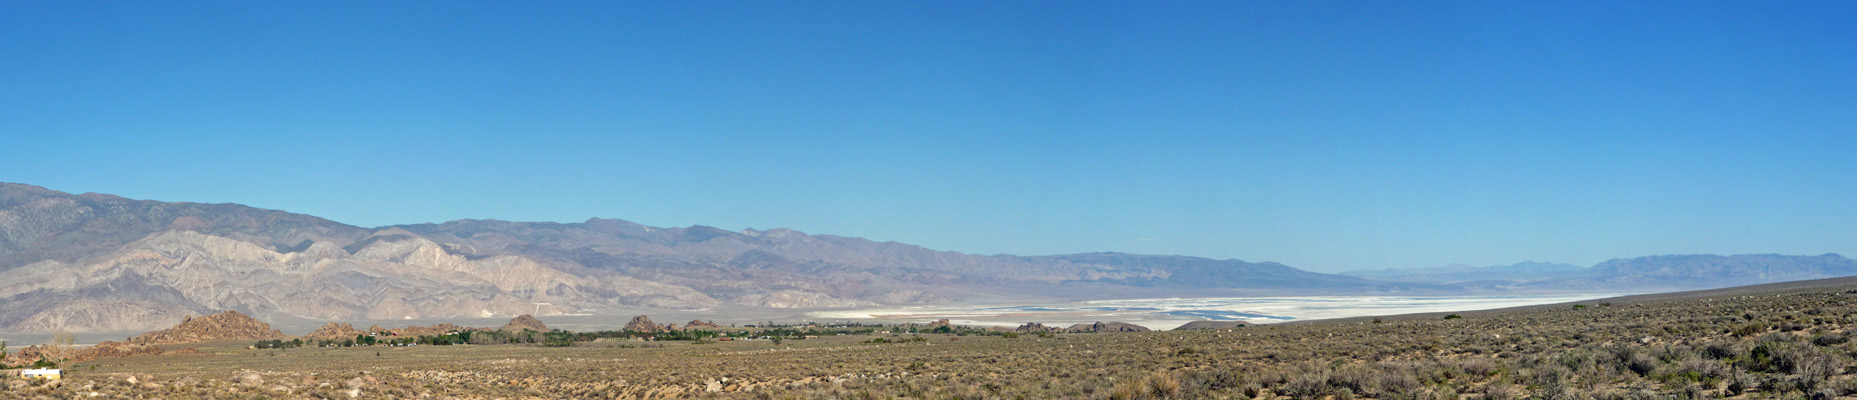 Owens Valley from Tuttle Creek Campground CA